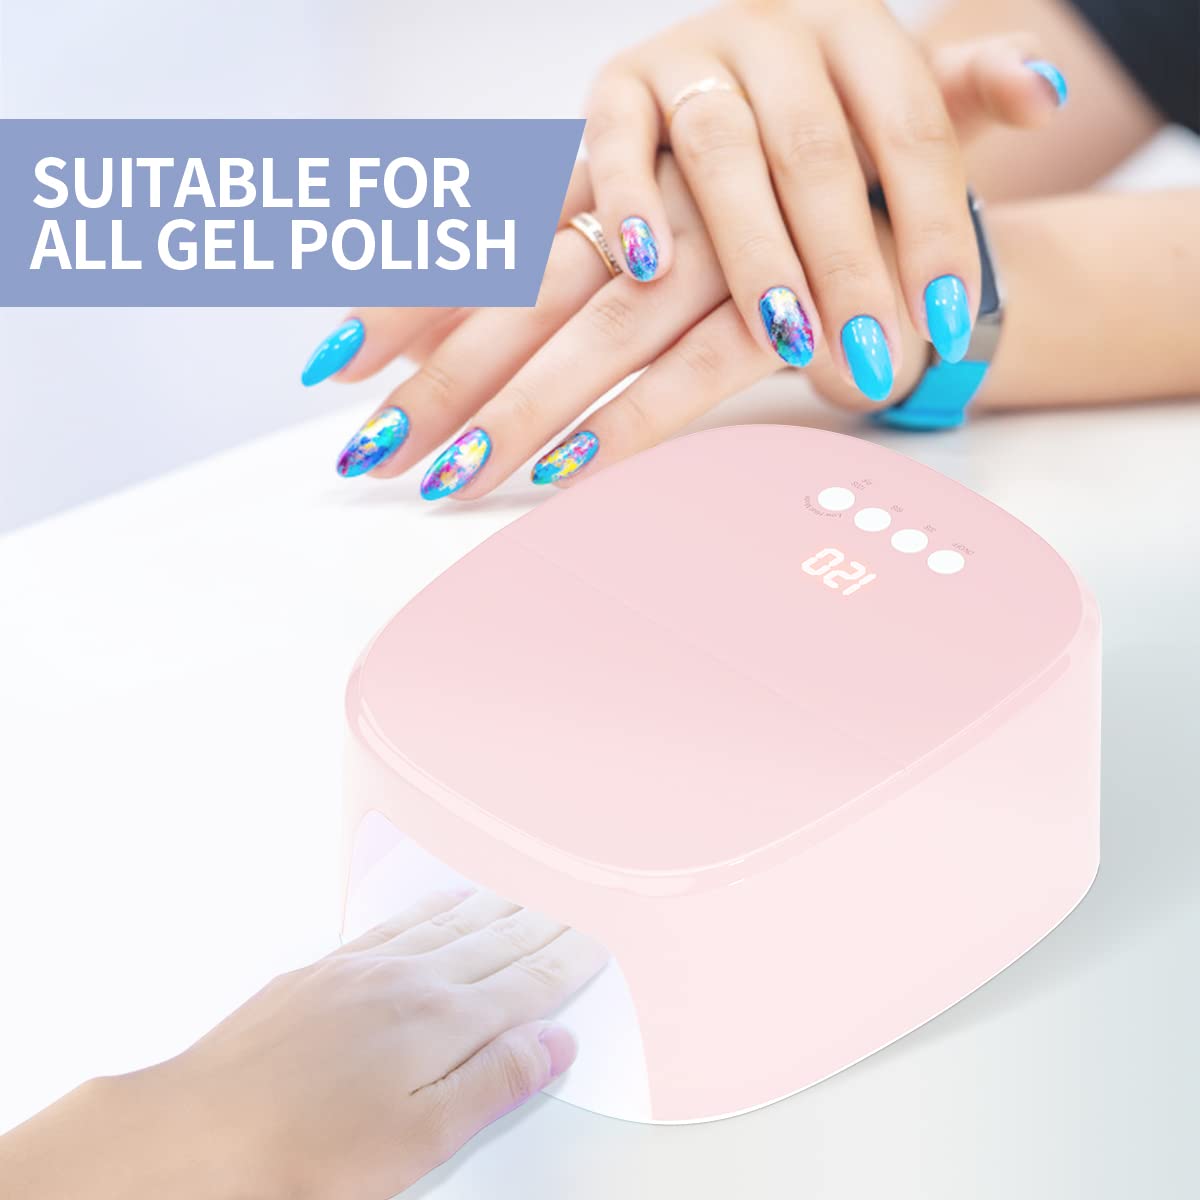 60W Professional LED Nail Lamp for Curing Nail Polish and Have USB Port for Charging Phone and Nail Drill